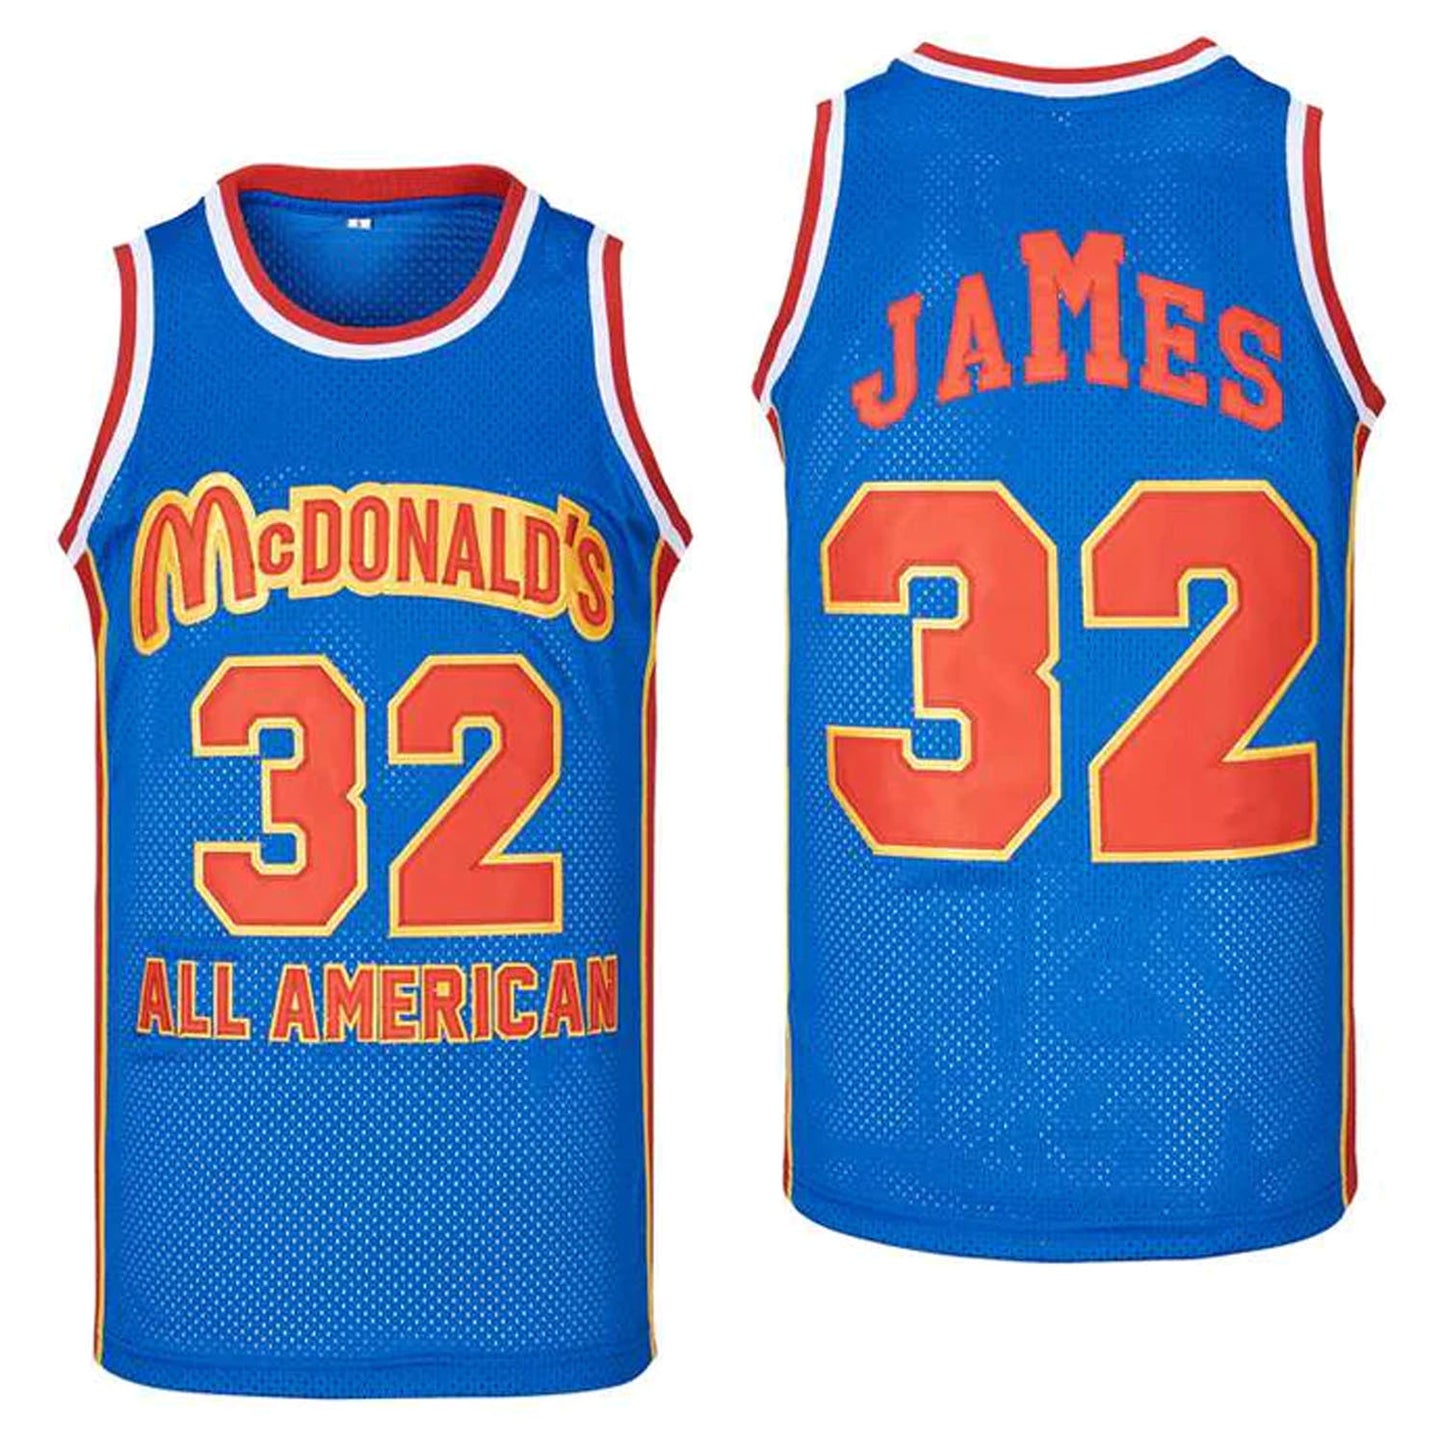 LeBron James All-American 32 Jersey